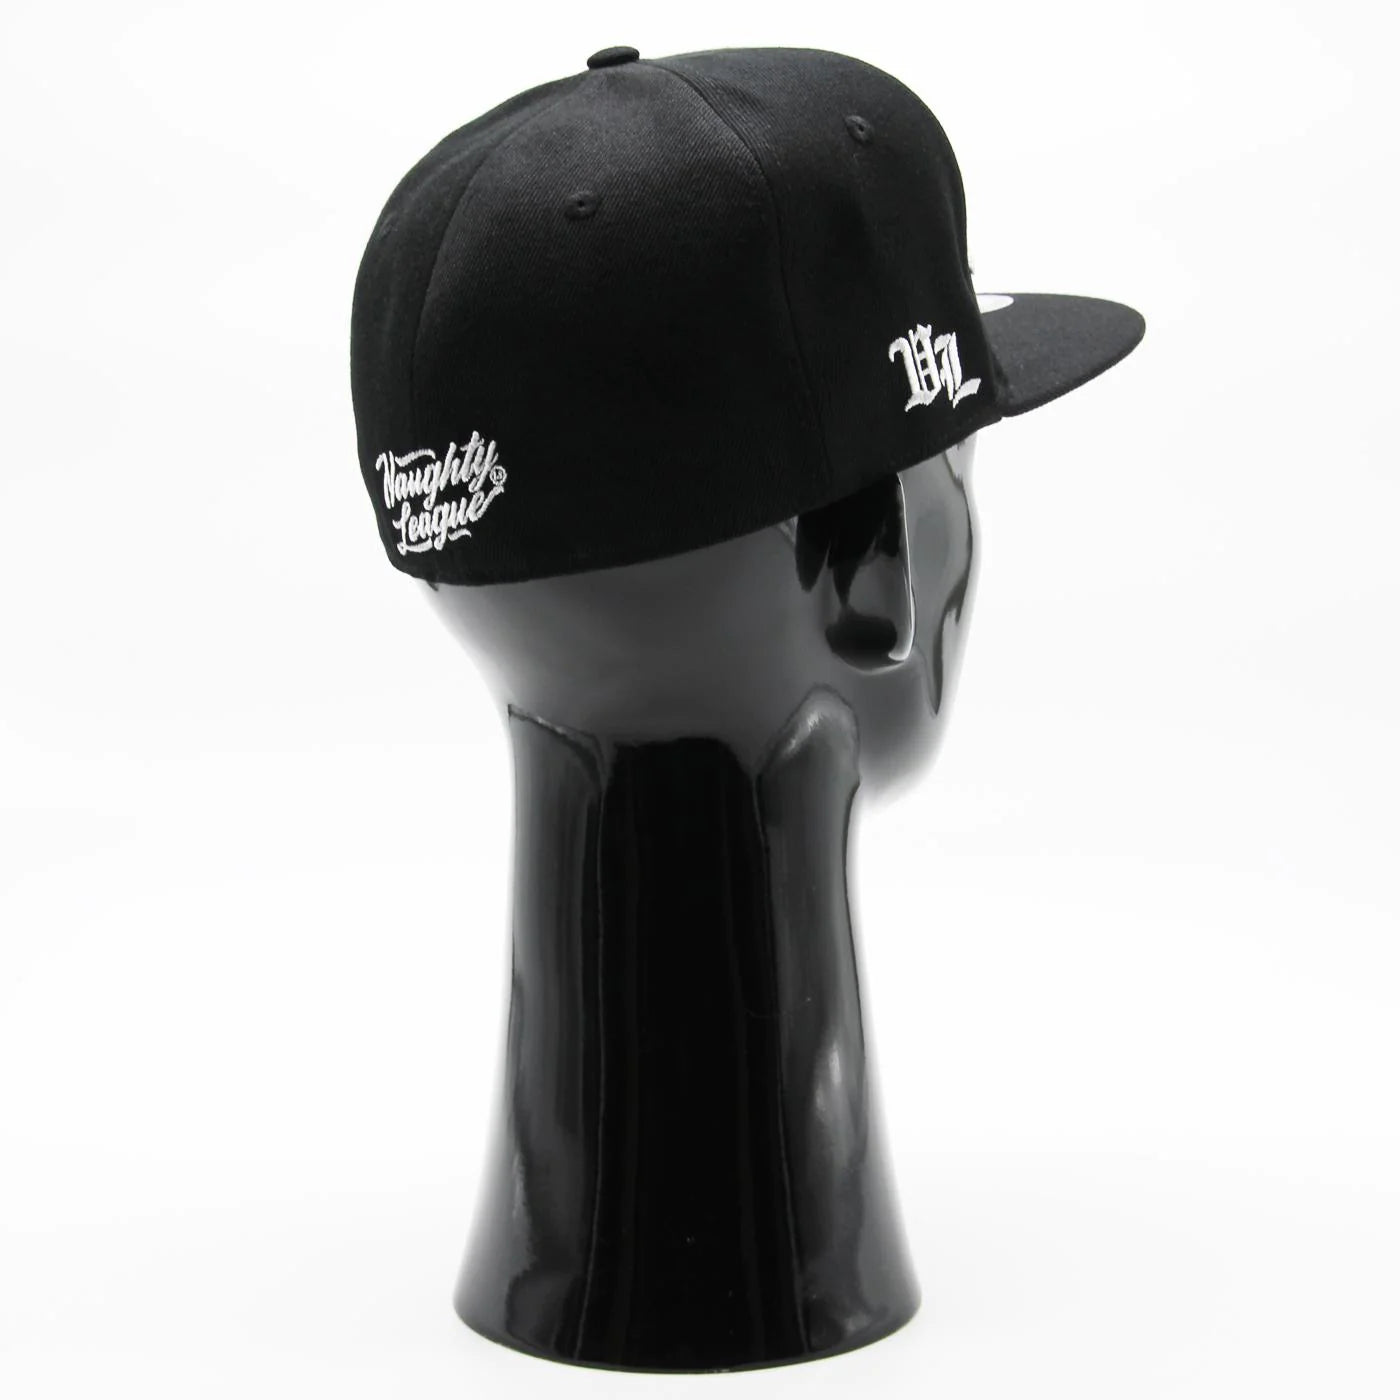 San Quentin Vatos Locos Old English Logo Fitted Black